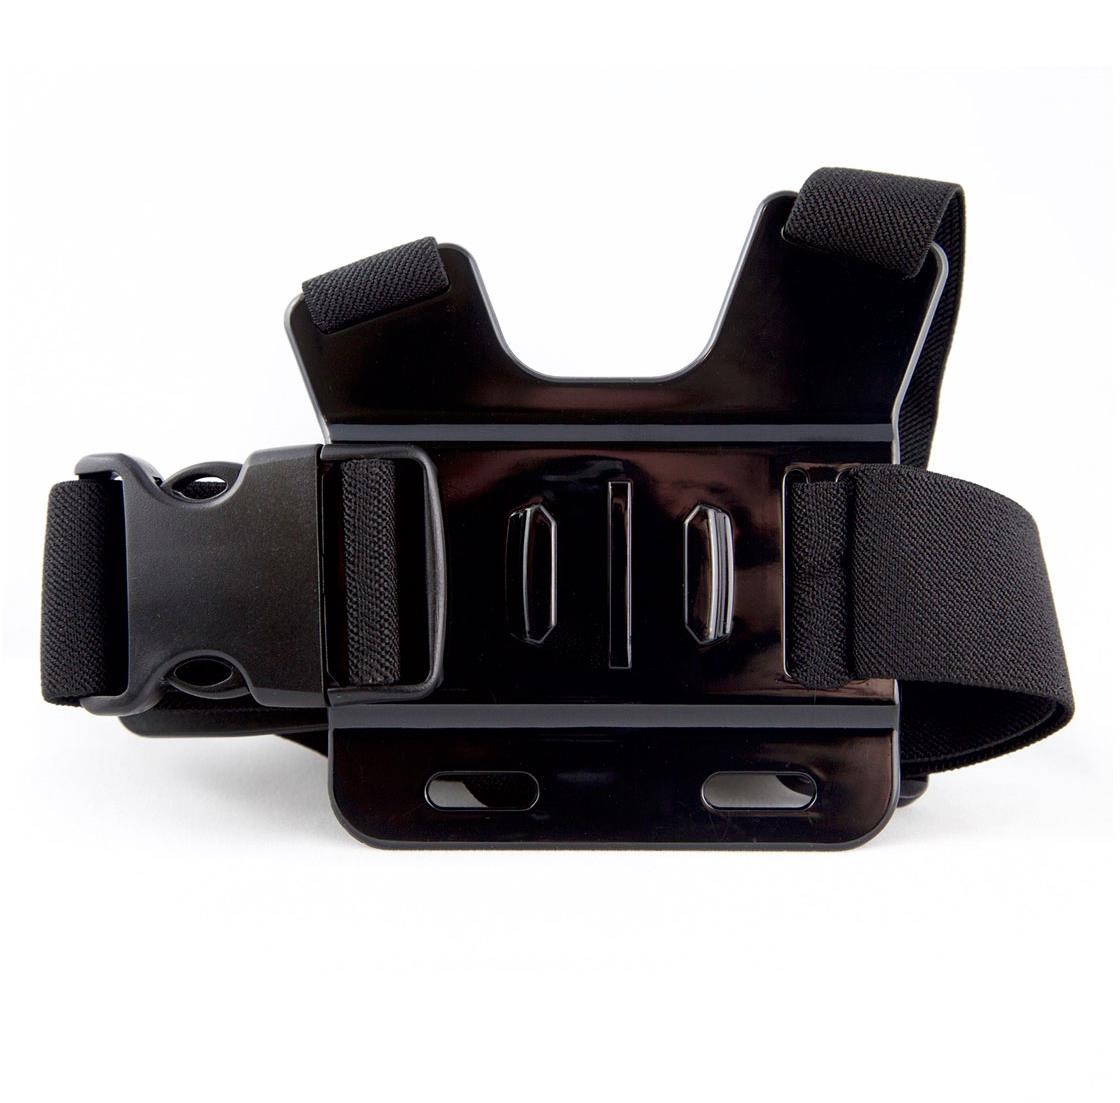 Olfi Chest Harness product image